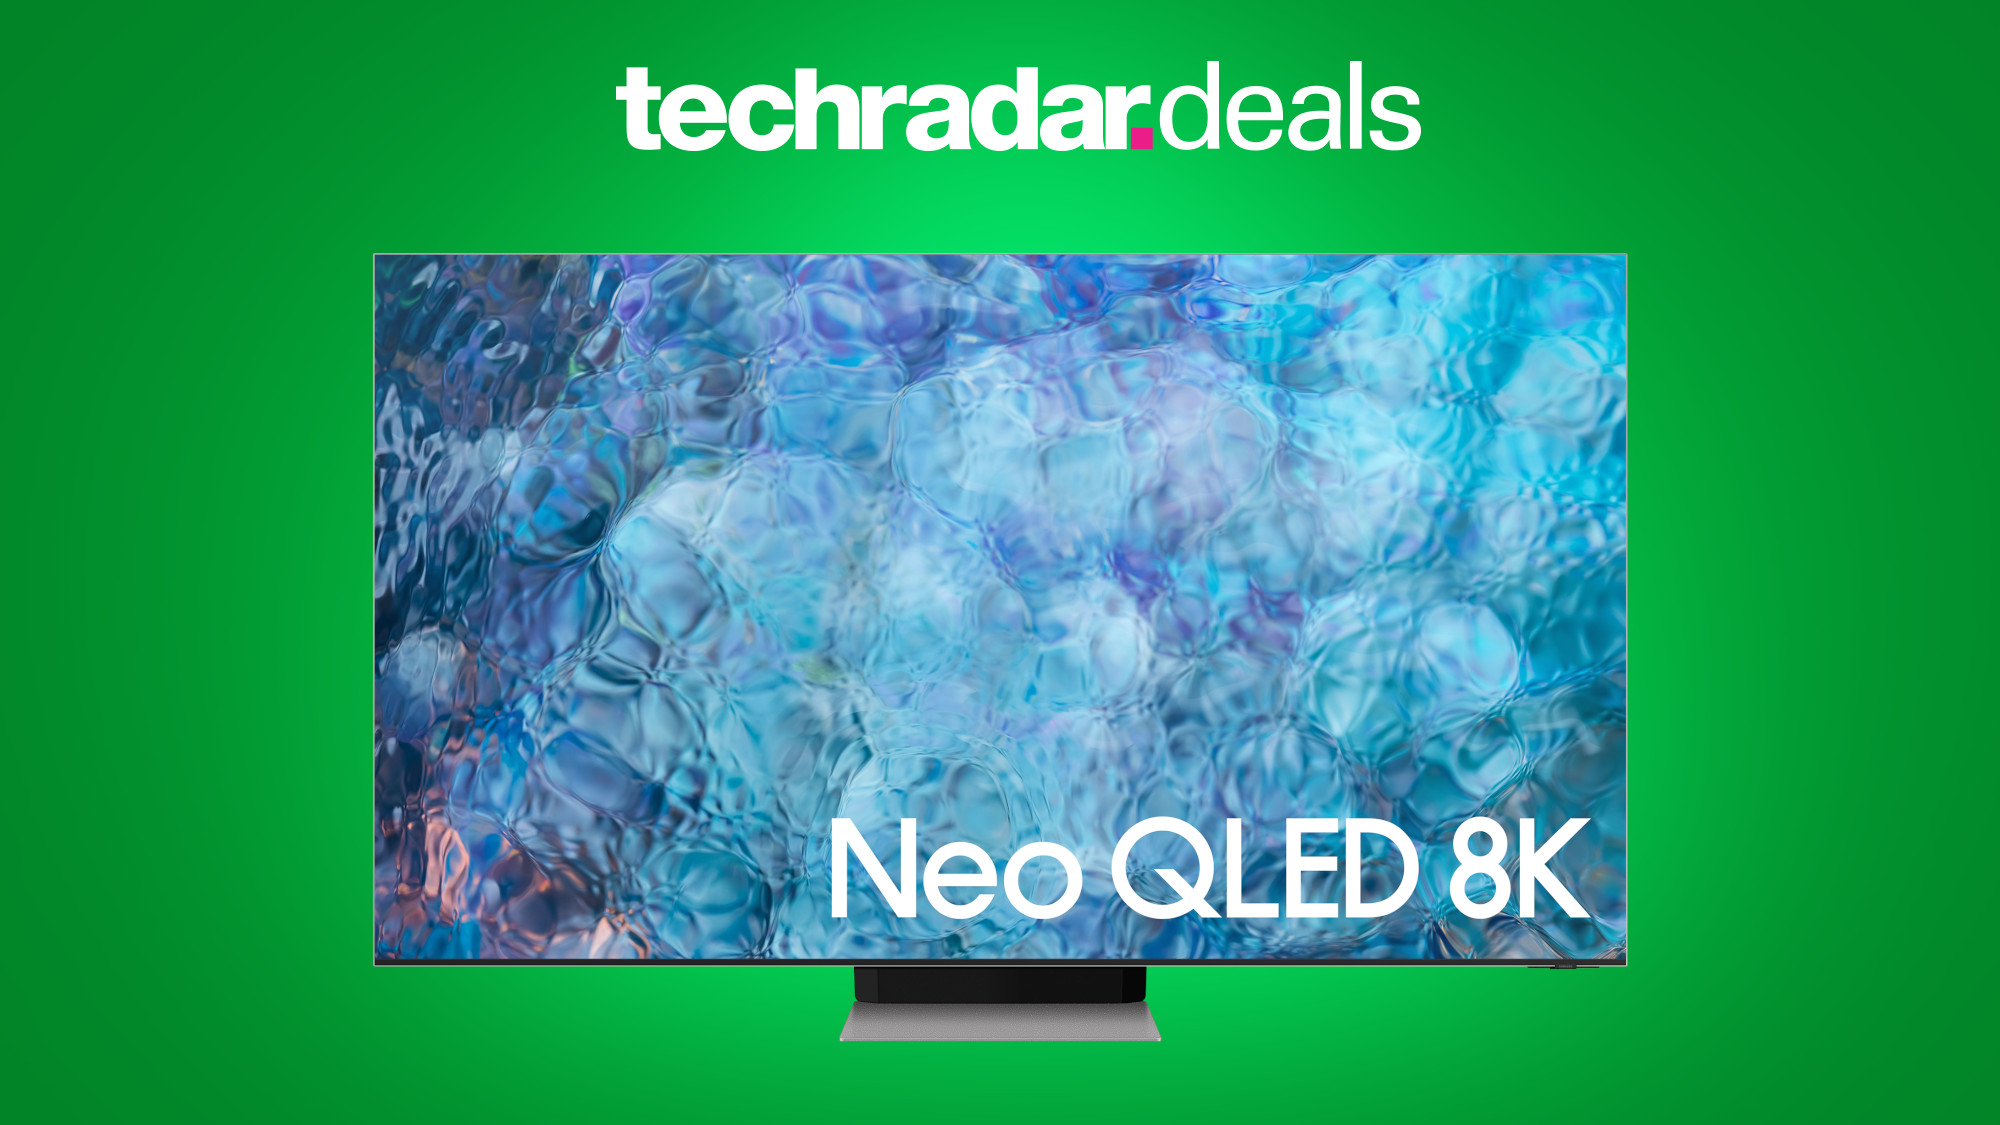 Deals photo: Samsung QN900A Neo QLED 8K TV on a green background